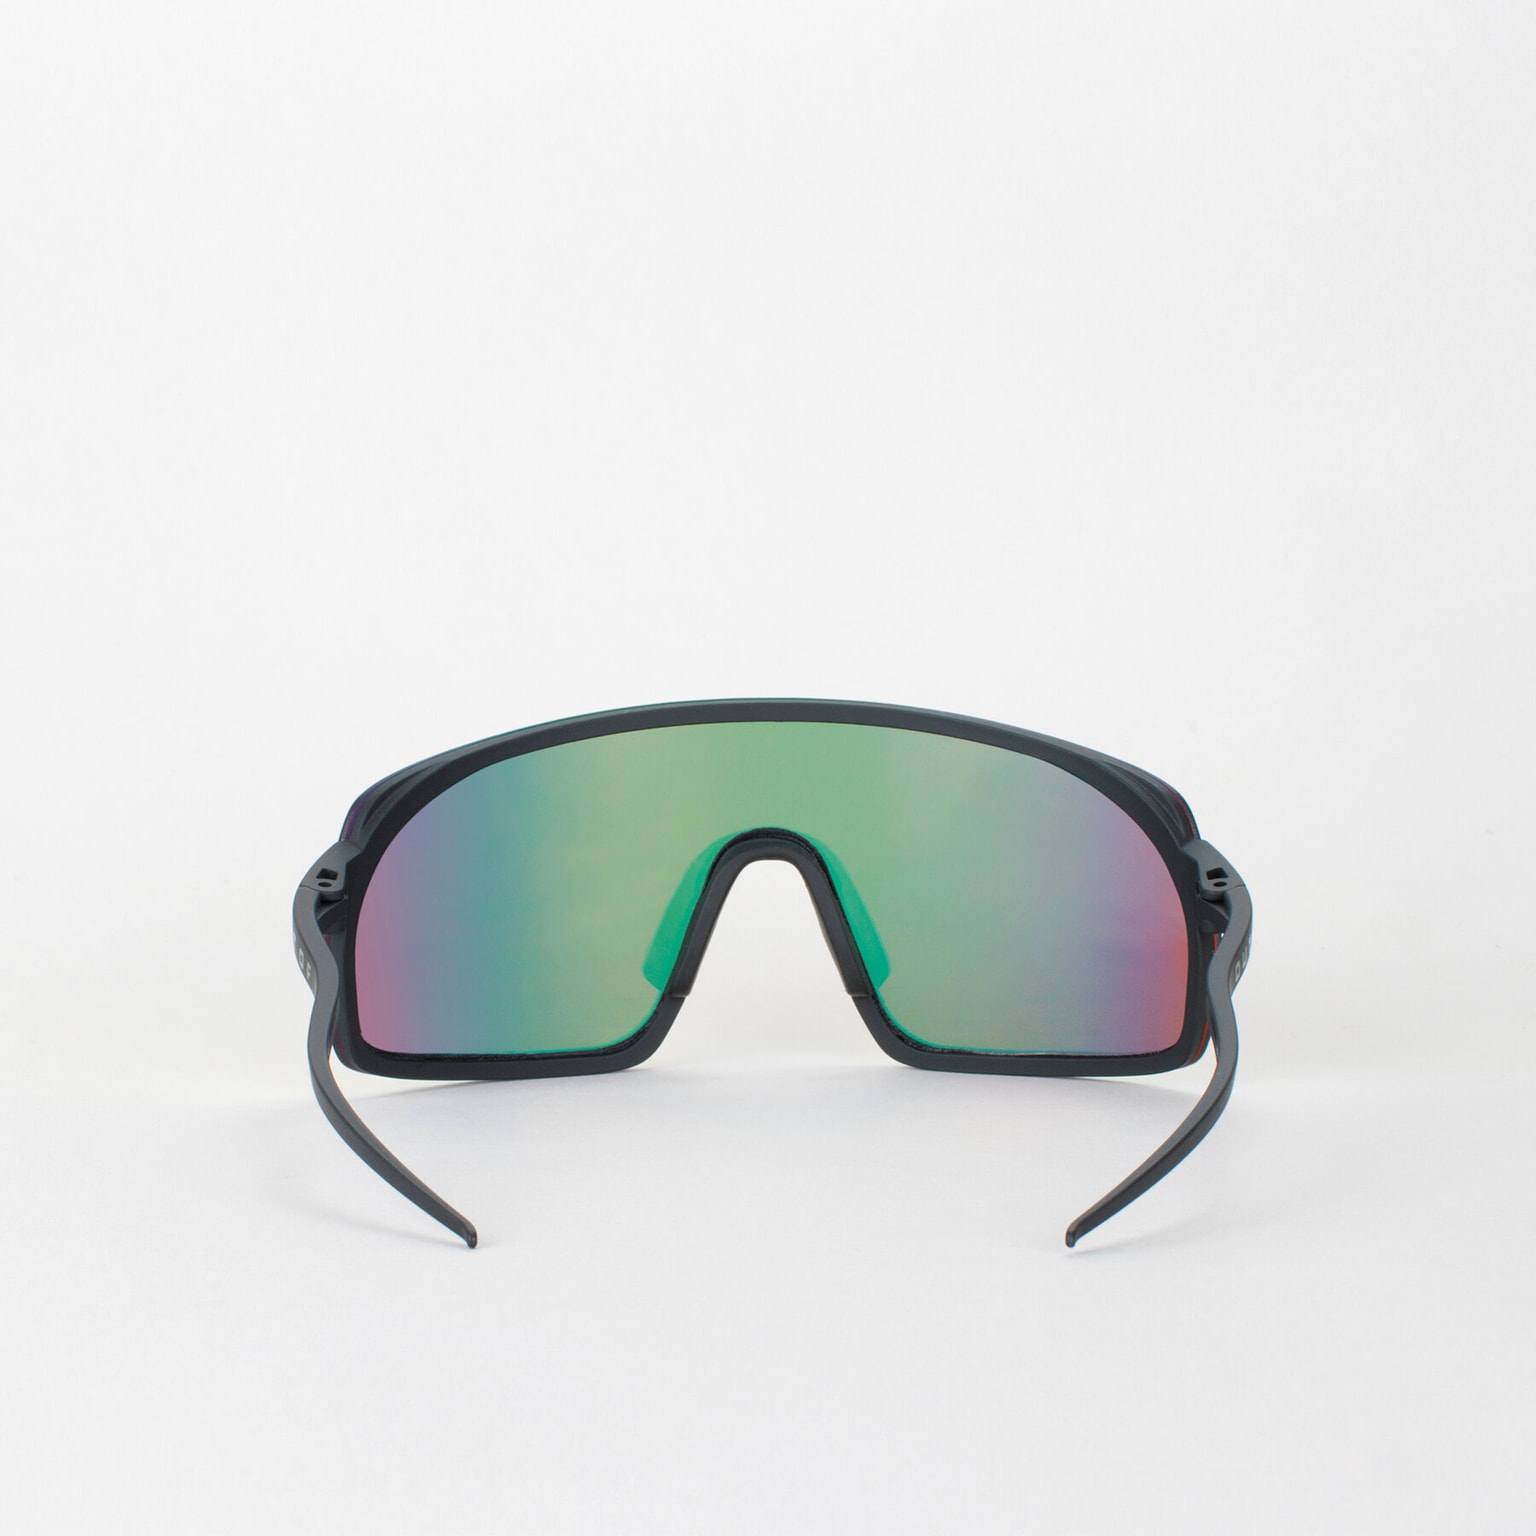 Pit Viper Pit Viper The Flip-Offs The Mystery Sportbrille 3